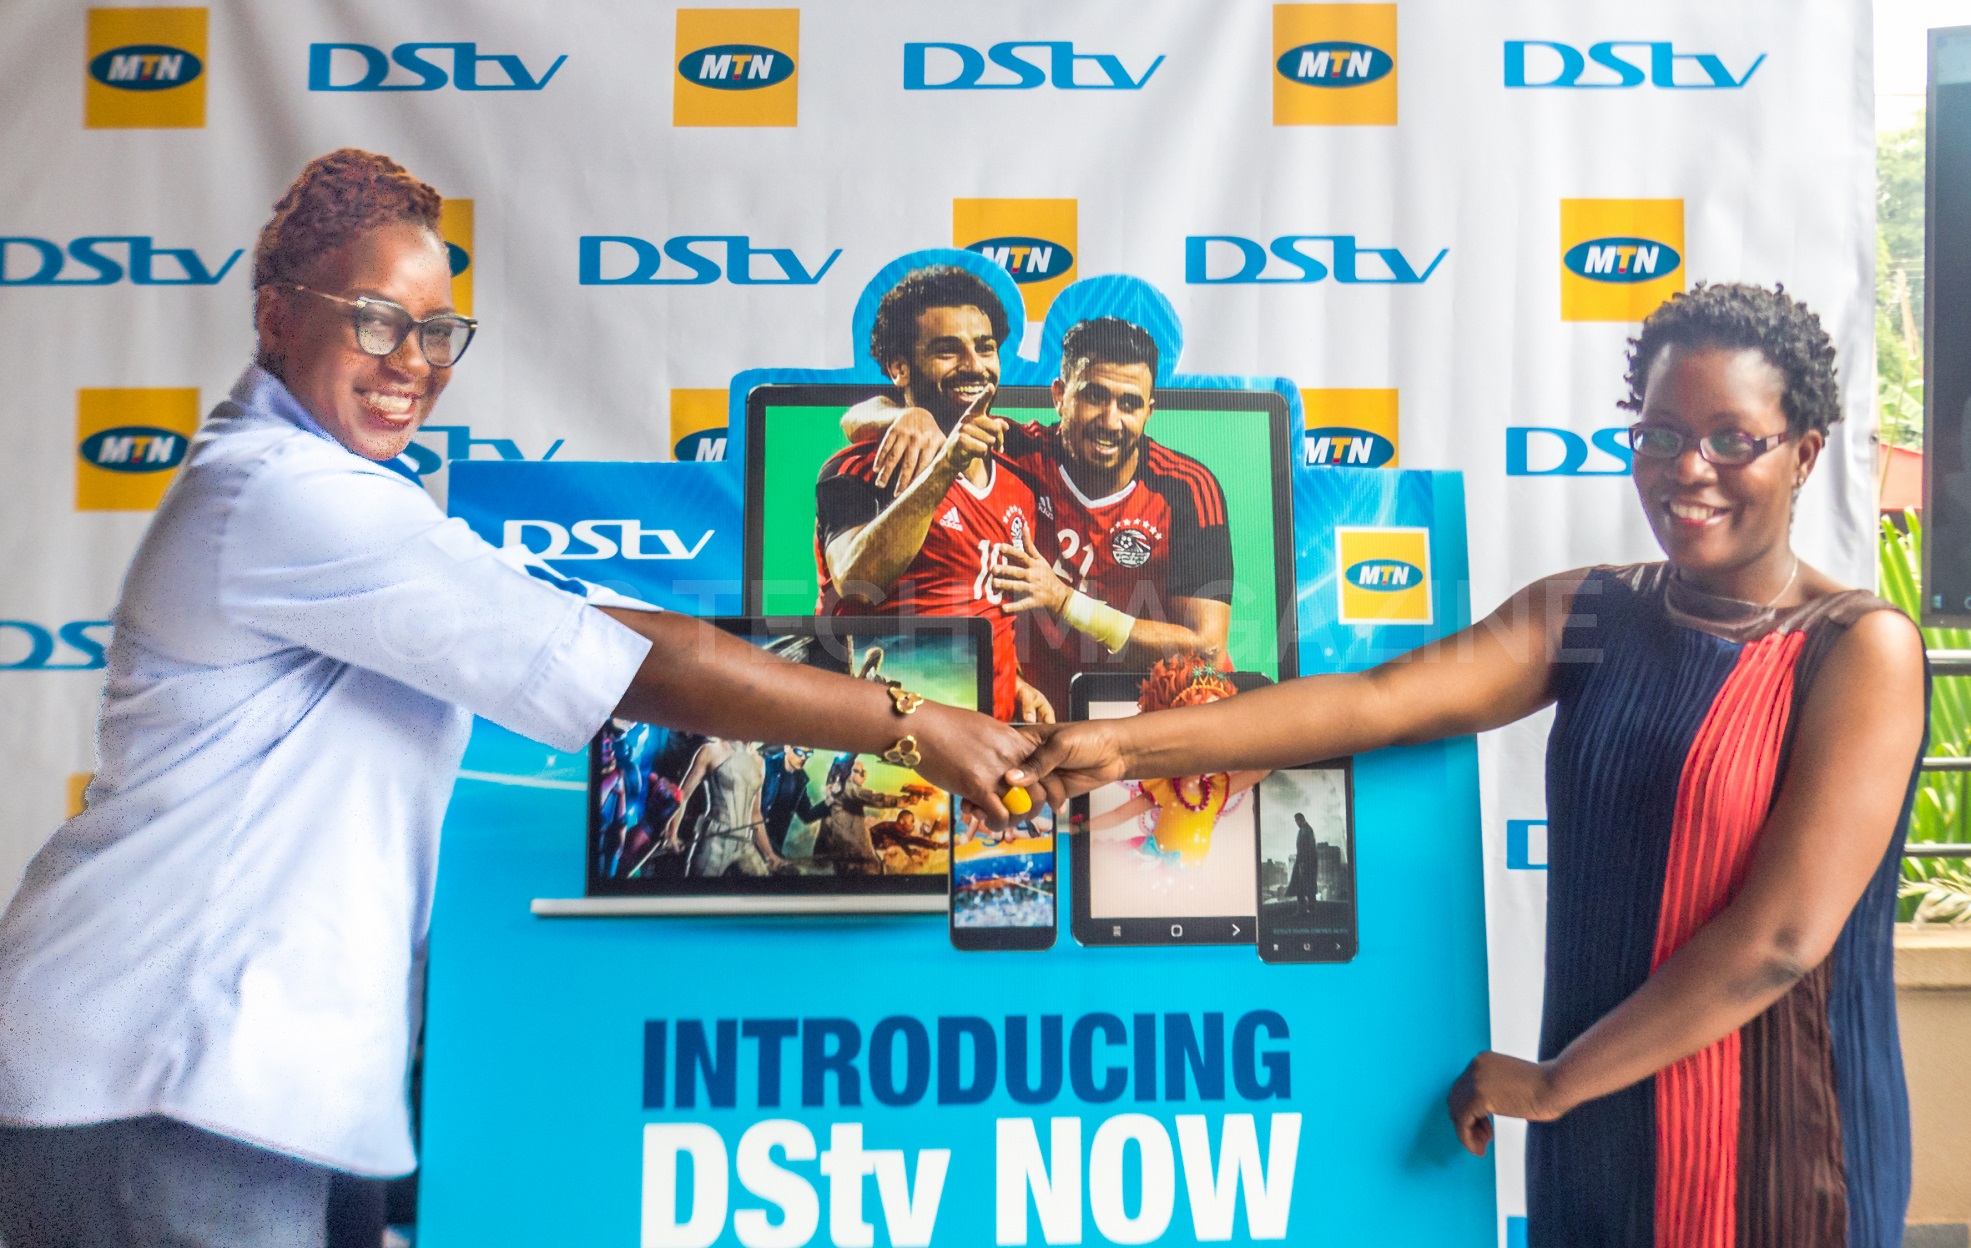 MultiChoice Uganda Head of Customer Experience, Ms. Patrica Kiconco (L) and MTN Uganda's Senior Manager for Digital; Ms. Suzan Kayemba (R) shake hands after the launch of DStv Now MTN Data Bundles at MultiChoice Uganda head offices is Kololo on Monday 24th, June 2019.